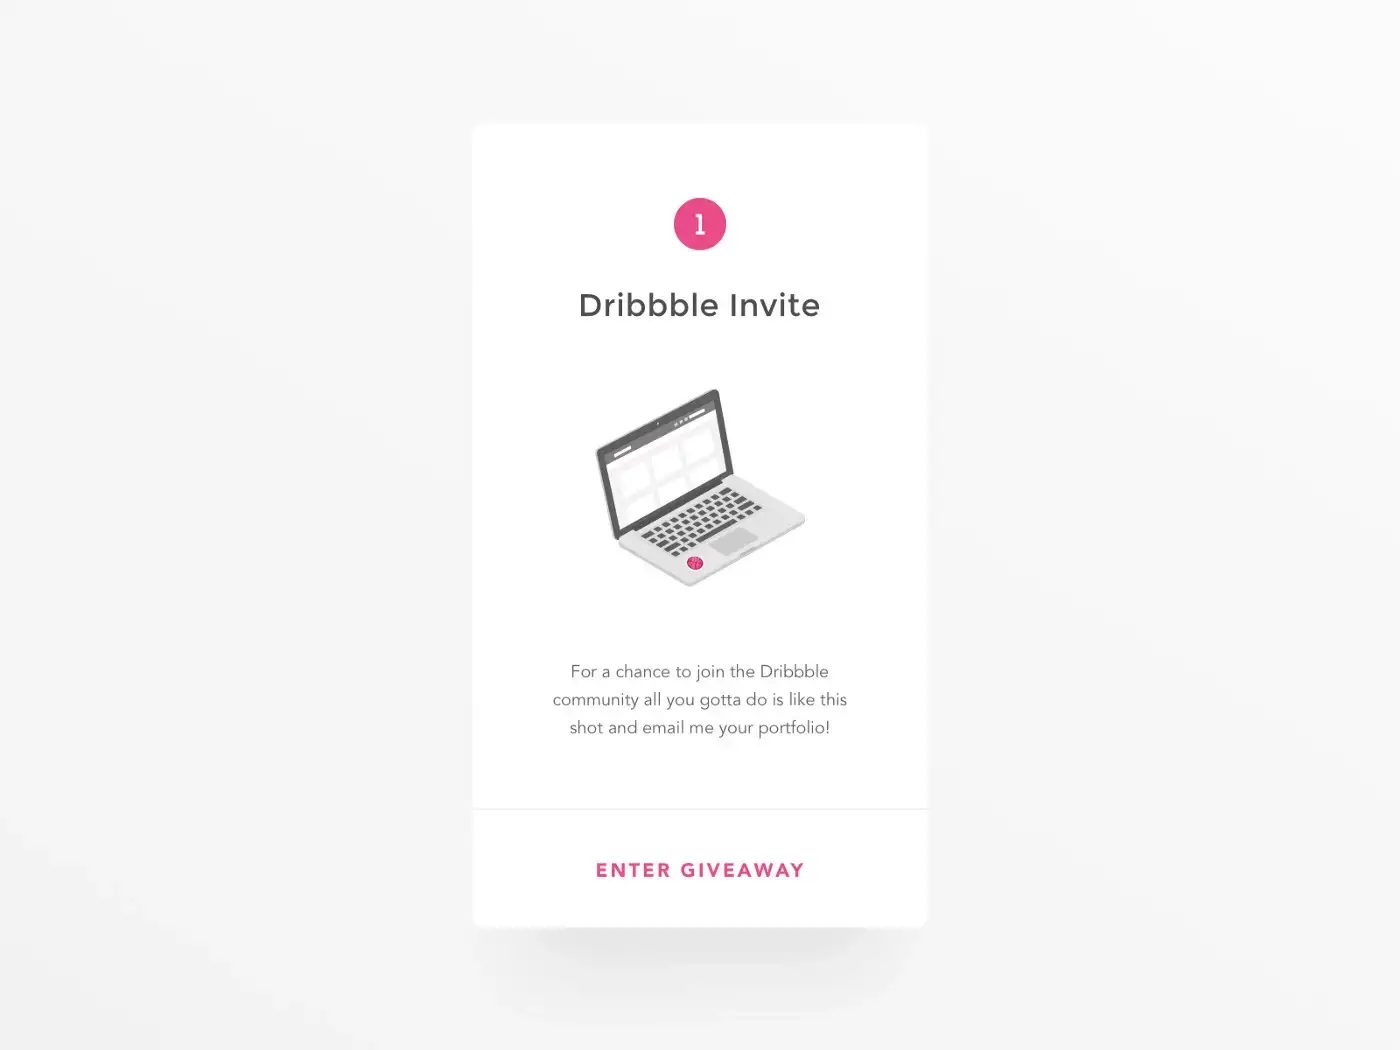 An image of a dribbble invite solicitation